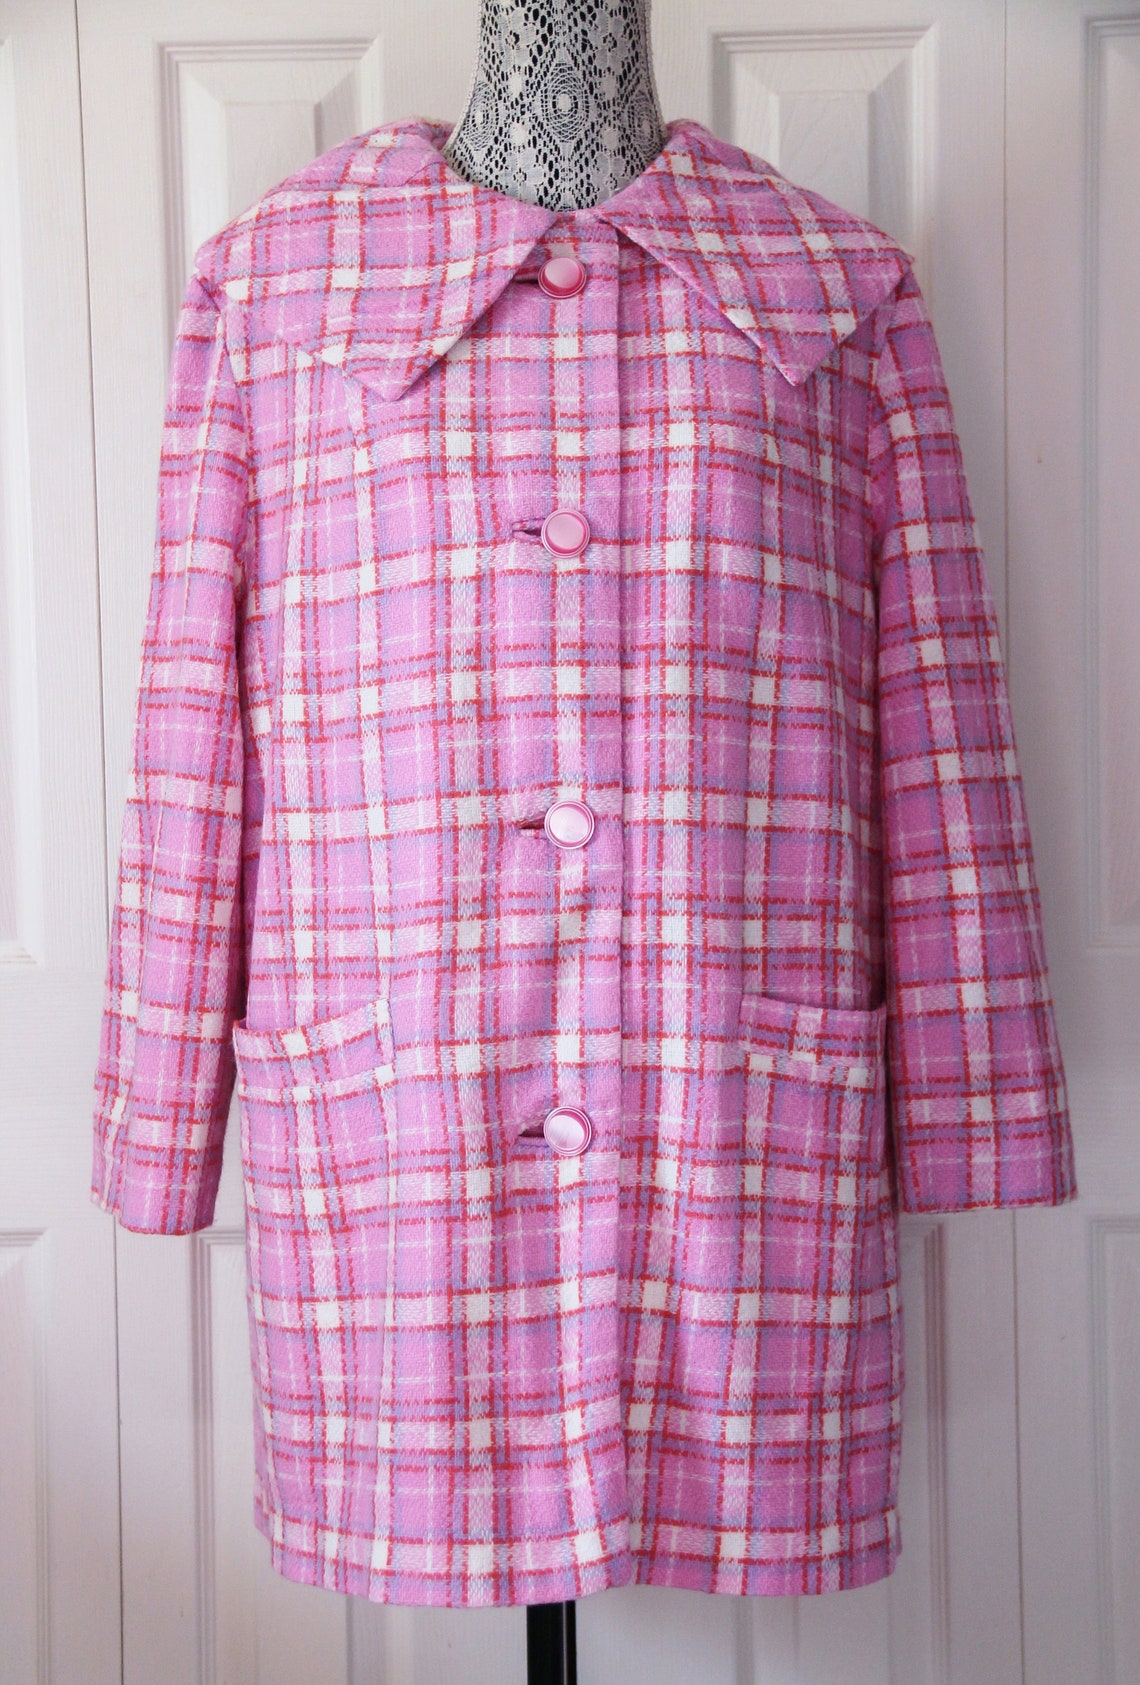 1960s Pink Checkered Coat Extra Large | Etsy